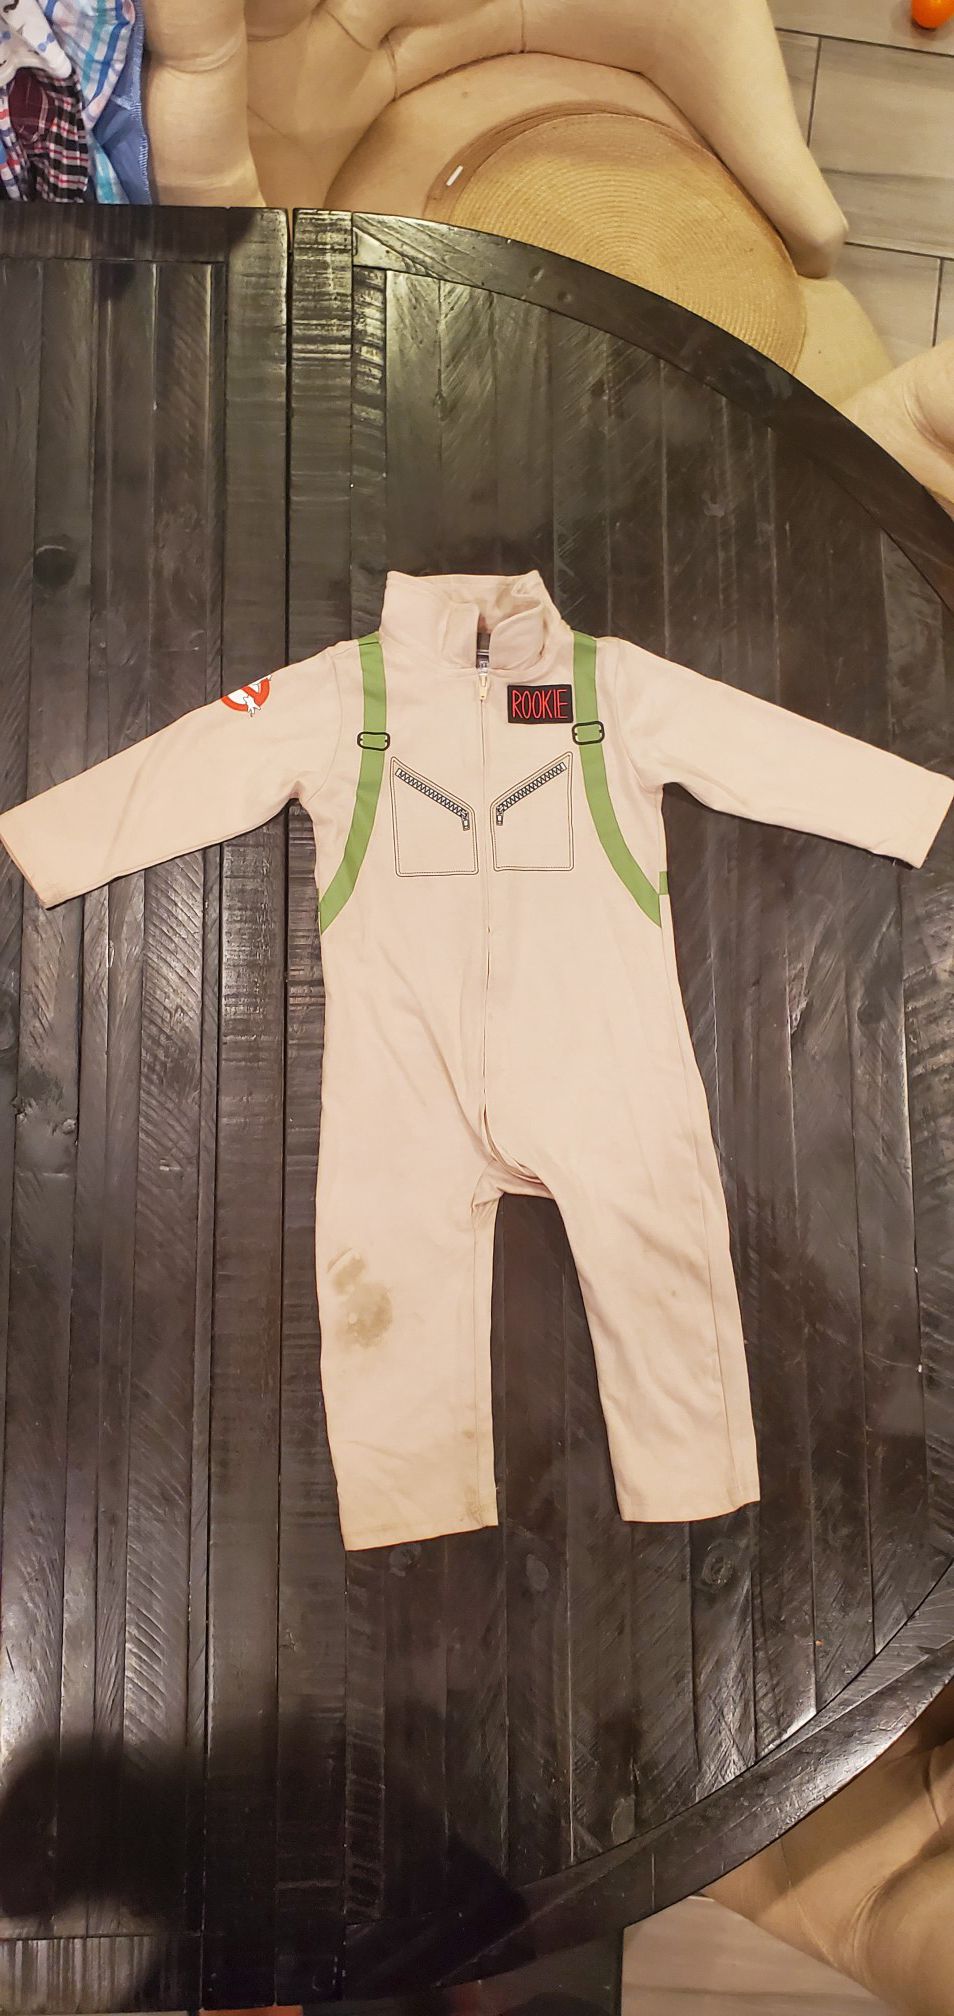 Baby Ghostbusters one piece costume 18m-24m